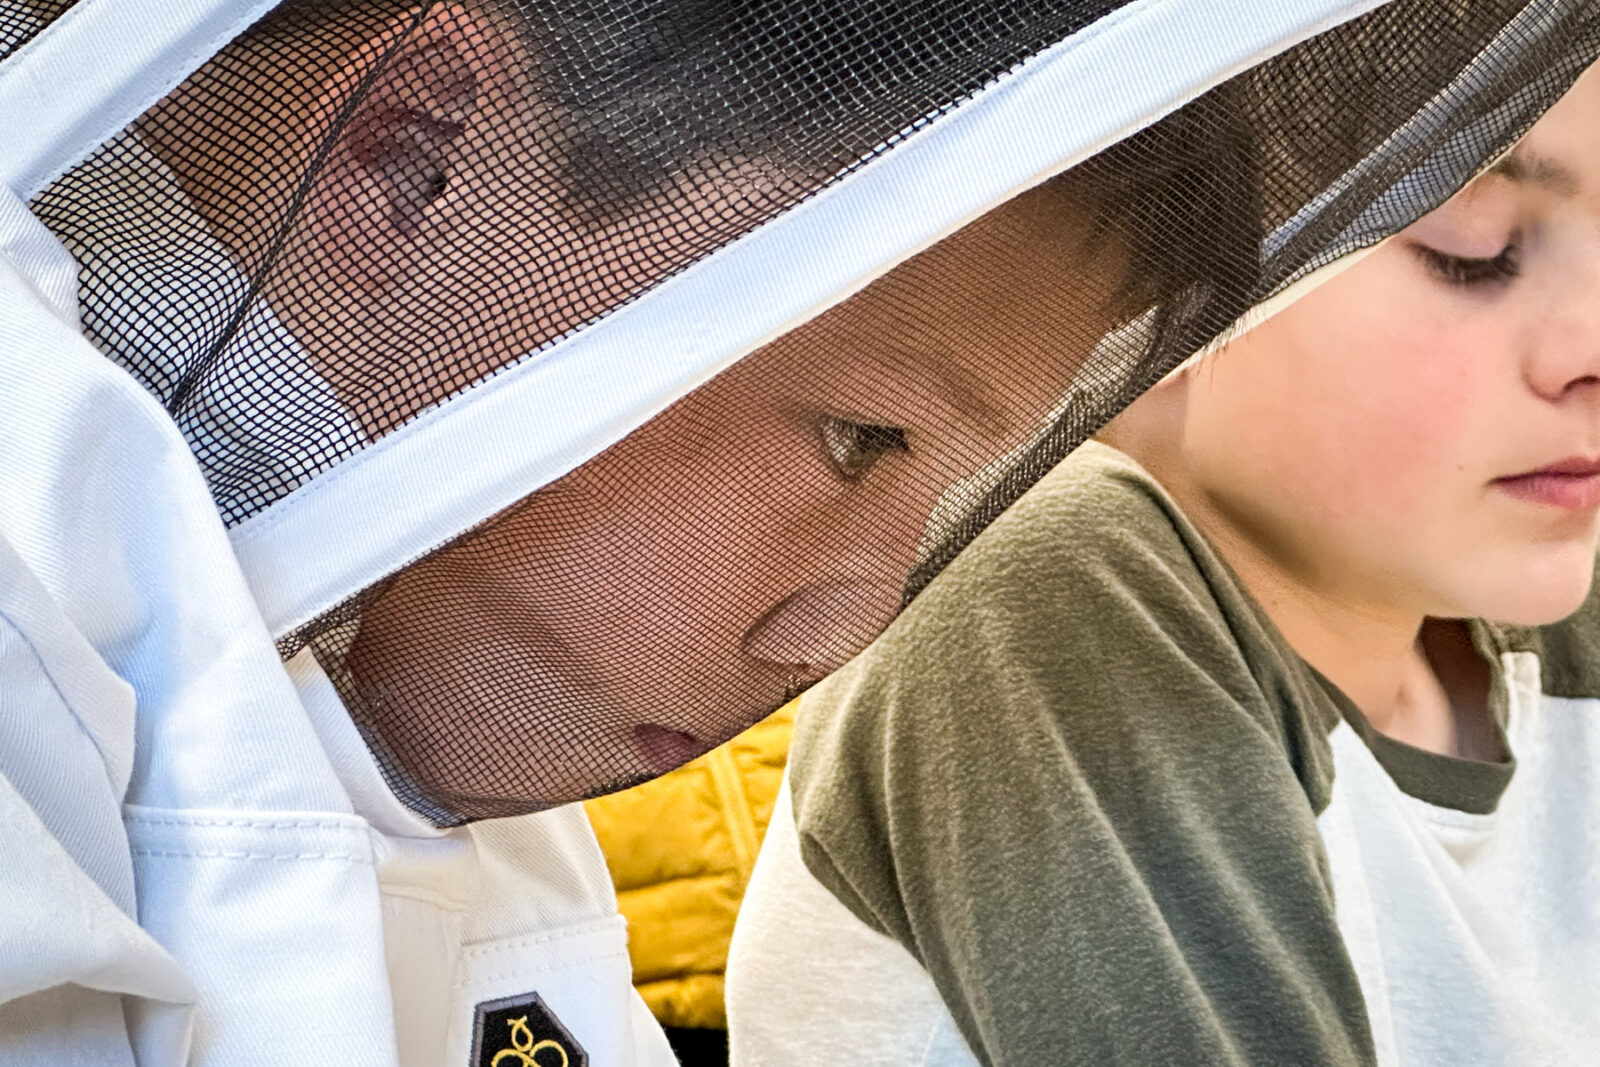 How do you remove a mite from a honey bee’s back? Ask these 5th graders